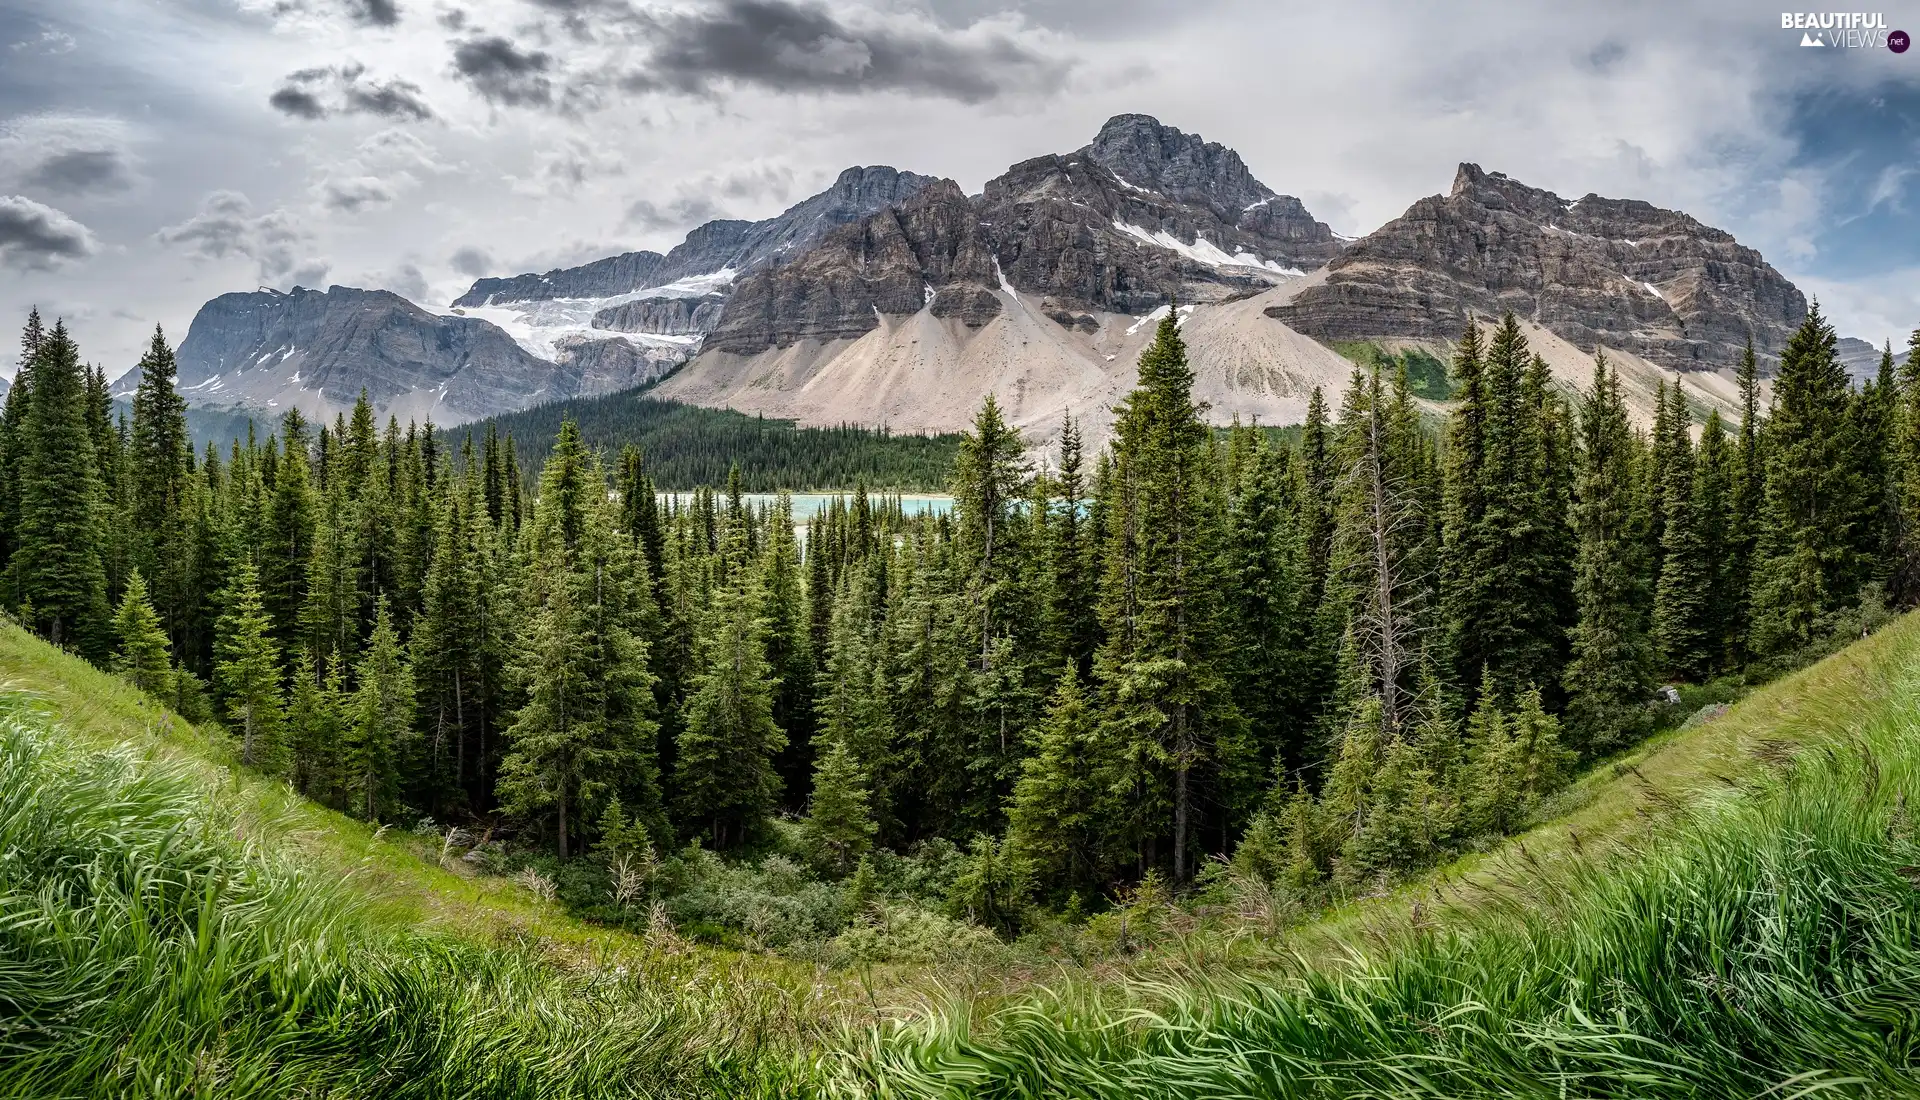 Bow Lake, trees, Canada, viewes, Province of Alberta, Mountains, Banff National Park, clouds